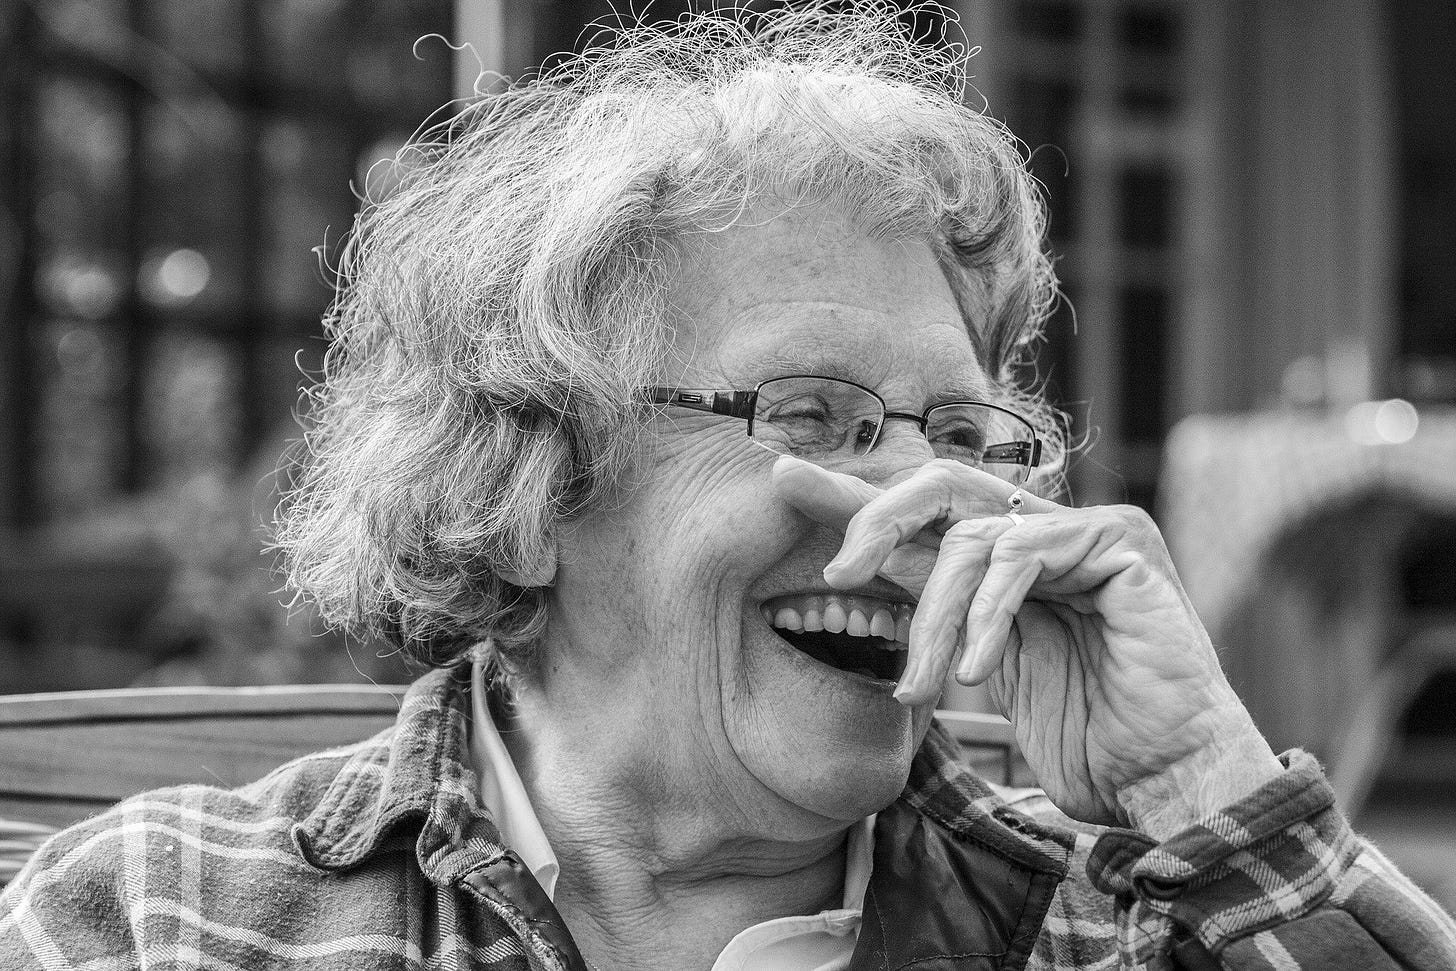 Black and white portrait photo of white woman with gray hair and glasses who is holding her right fist against her nose as she laughs, showing her false teeth.